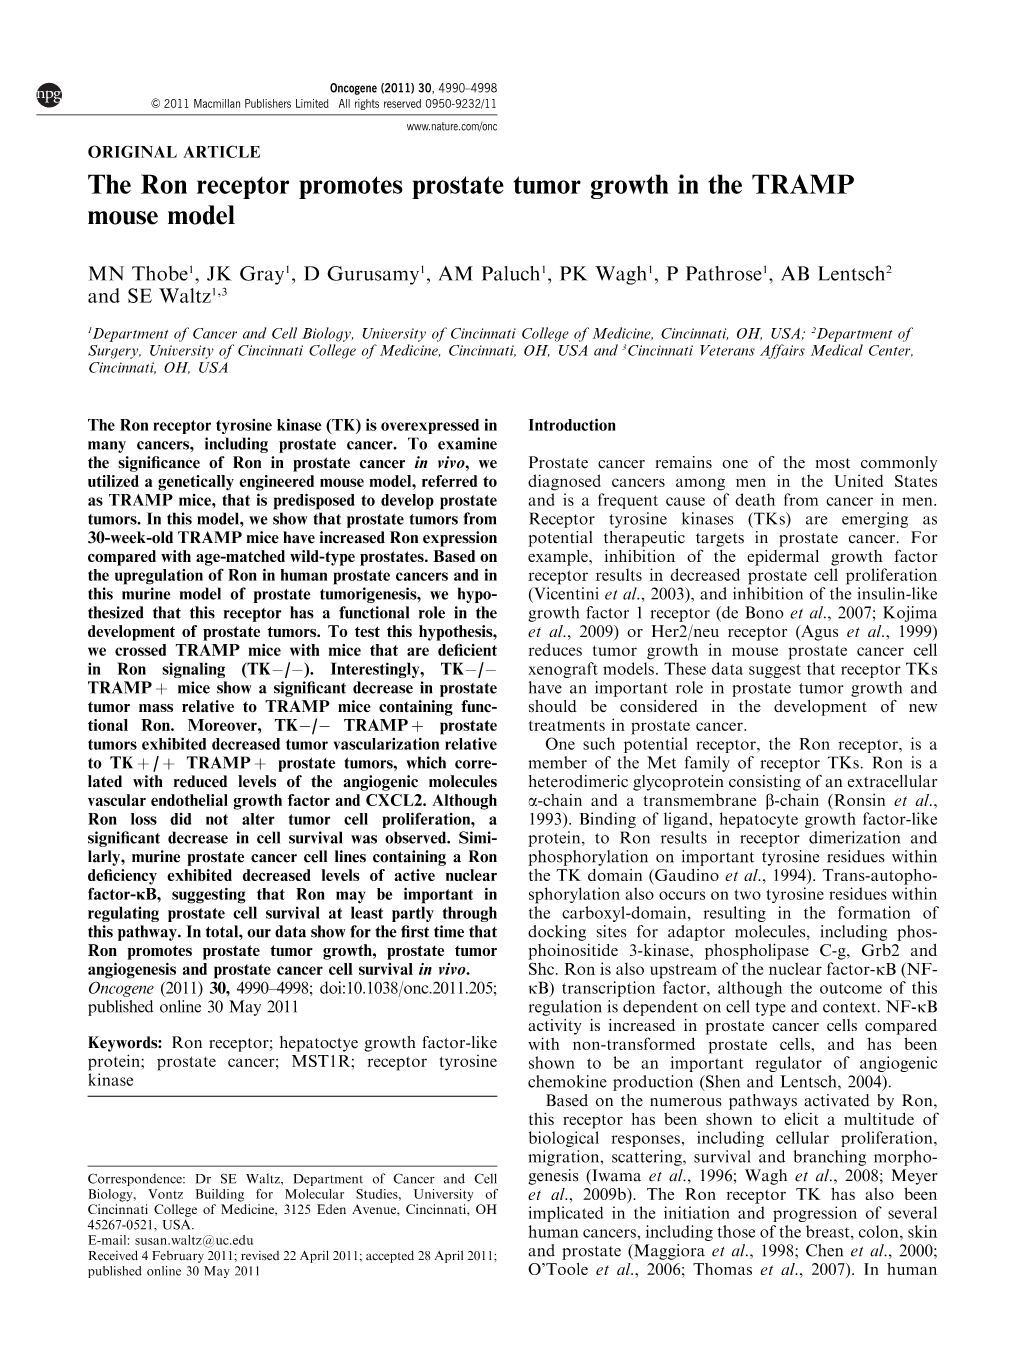 The Ron Receptor Promotes Prostate Tumor Growth in the TRAMP Mouse Model